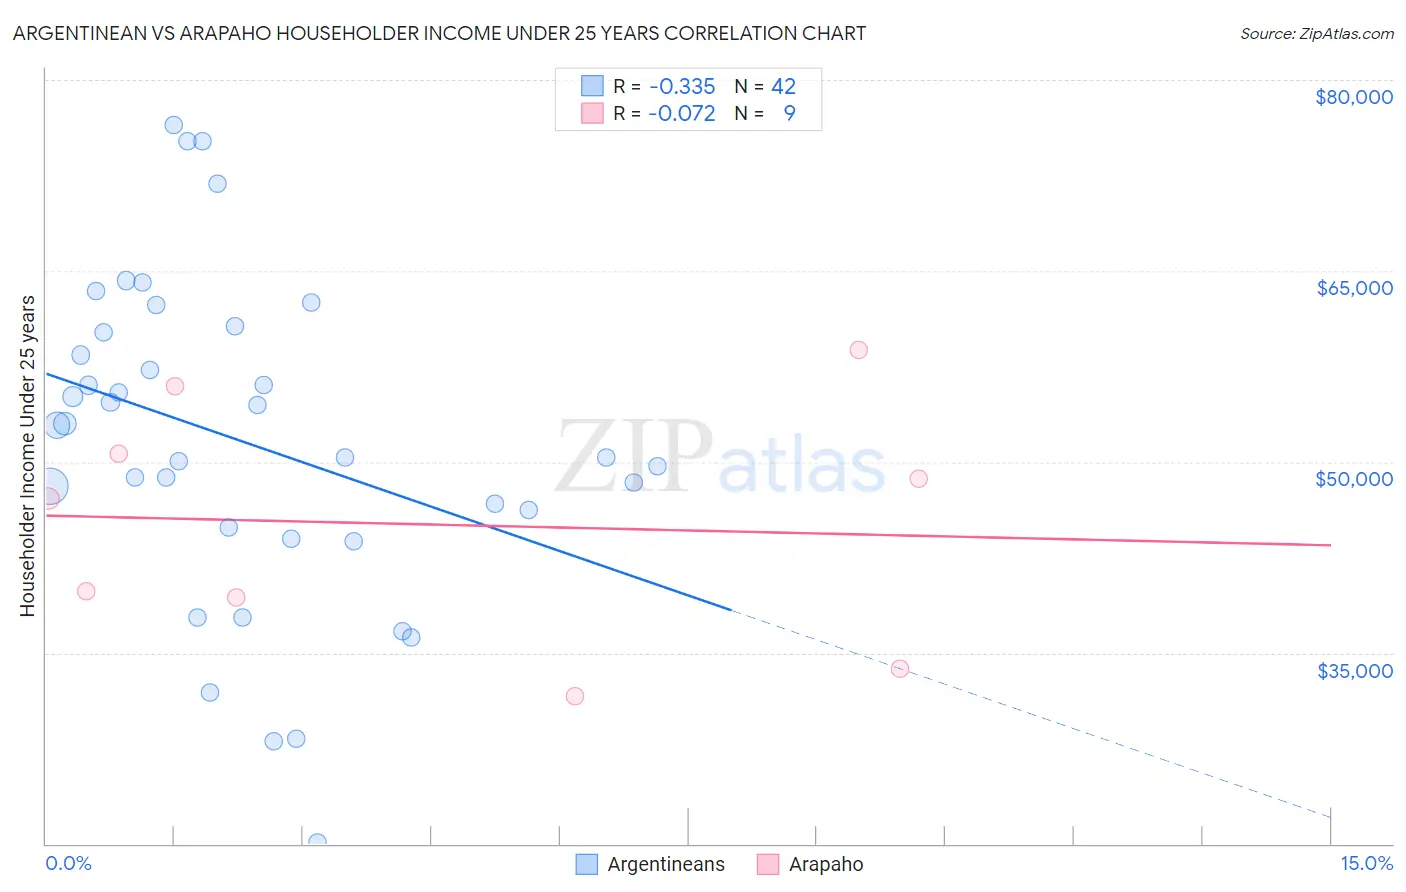 Argentinean vs Arapaho Householder Income Under 25 years